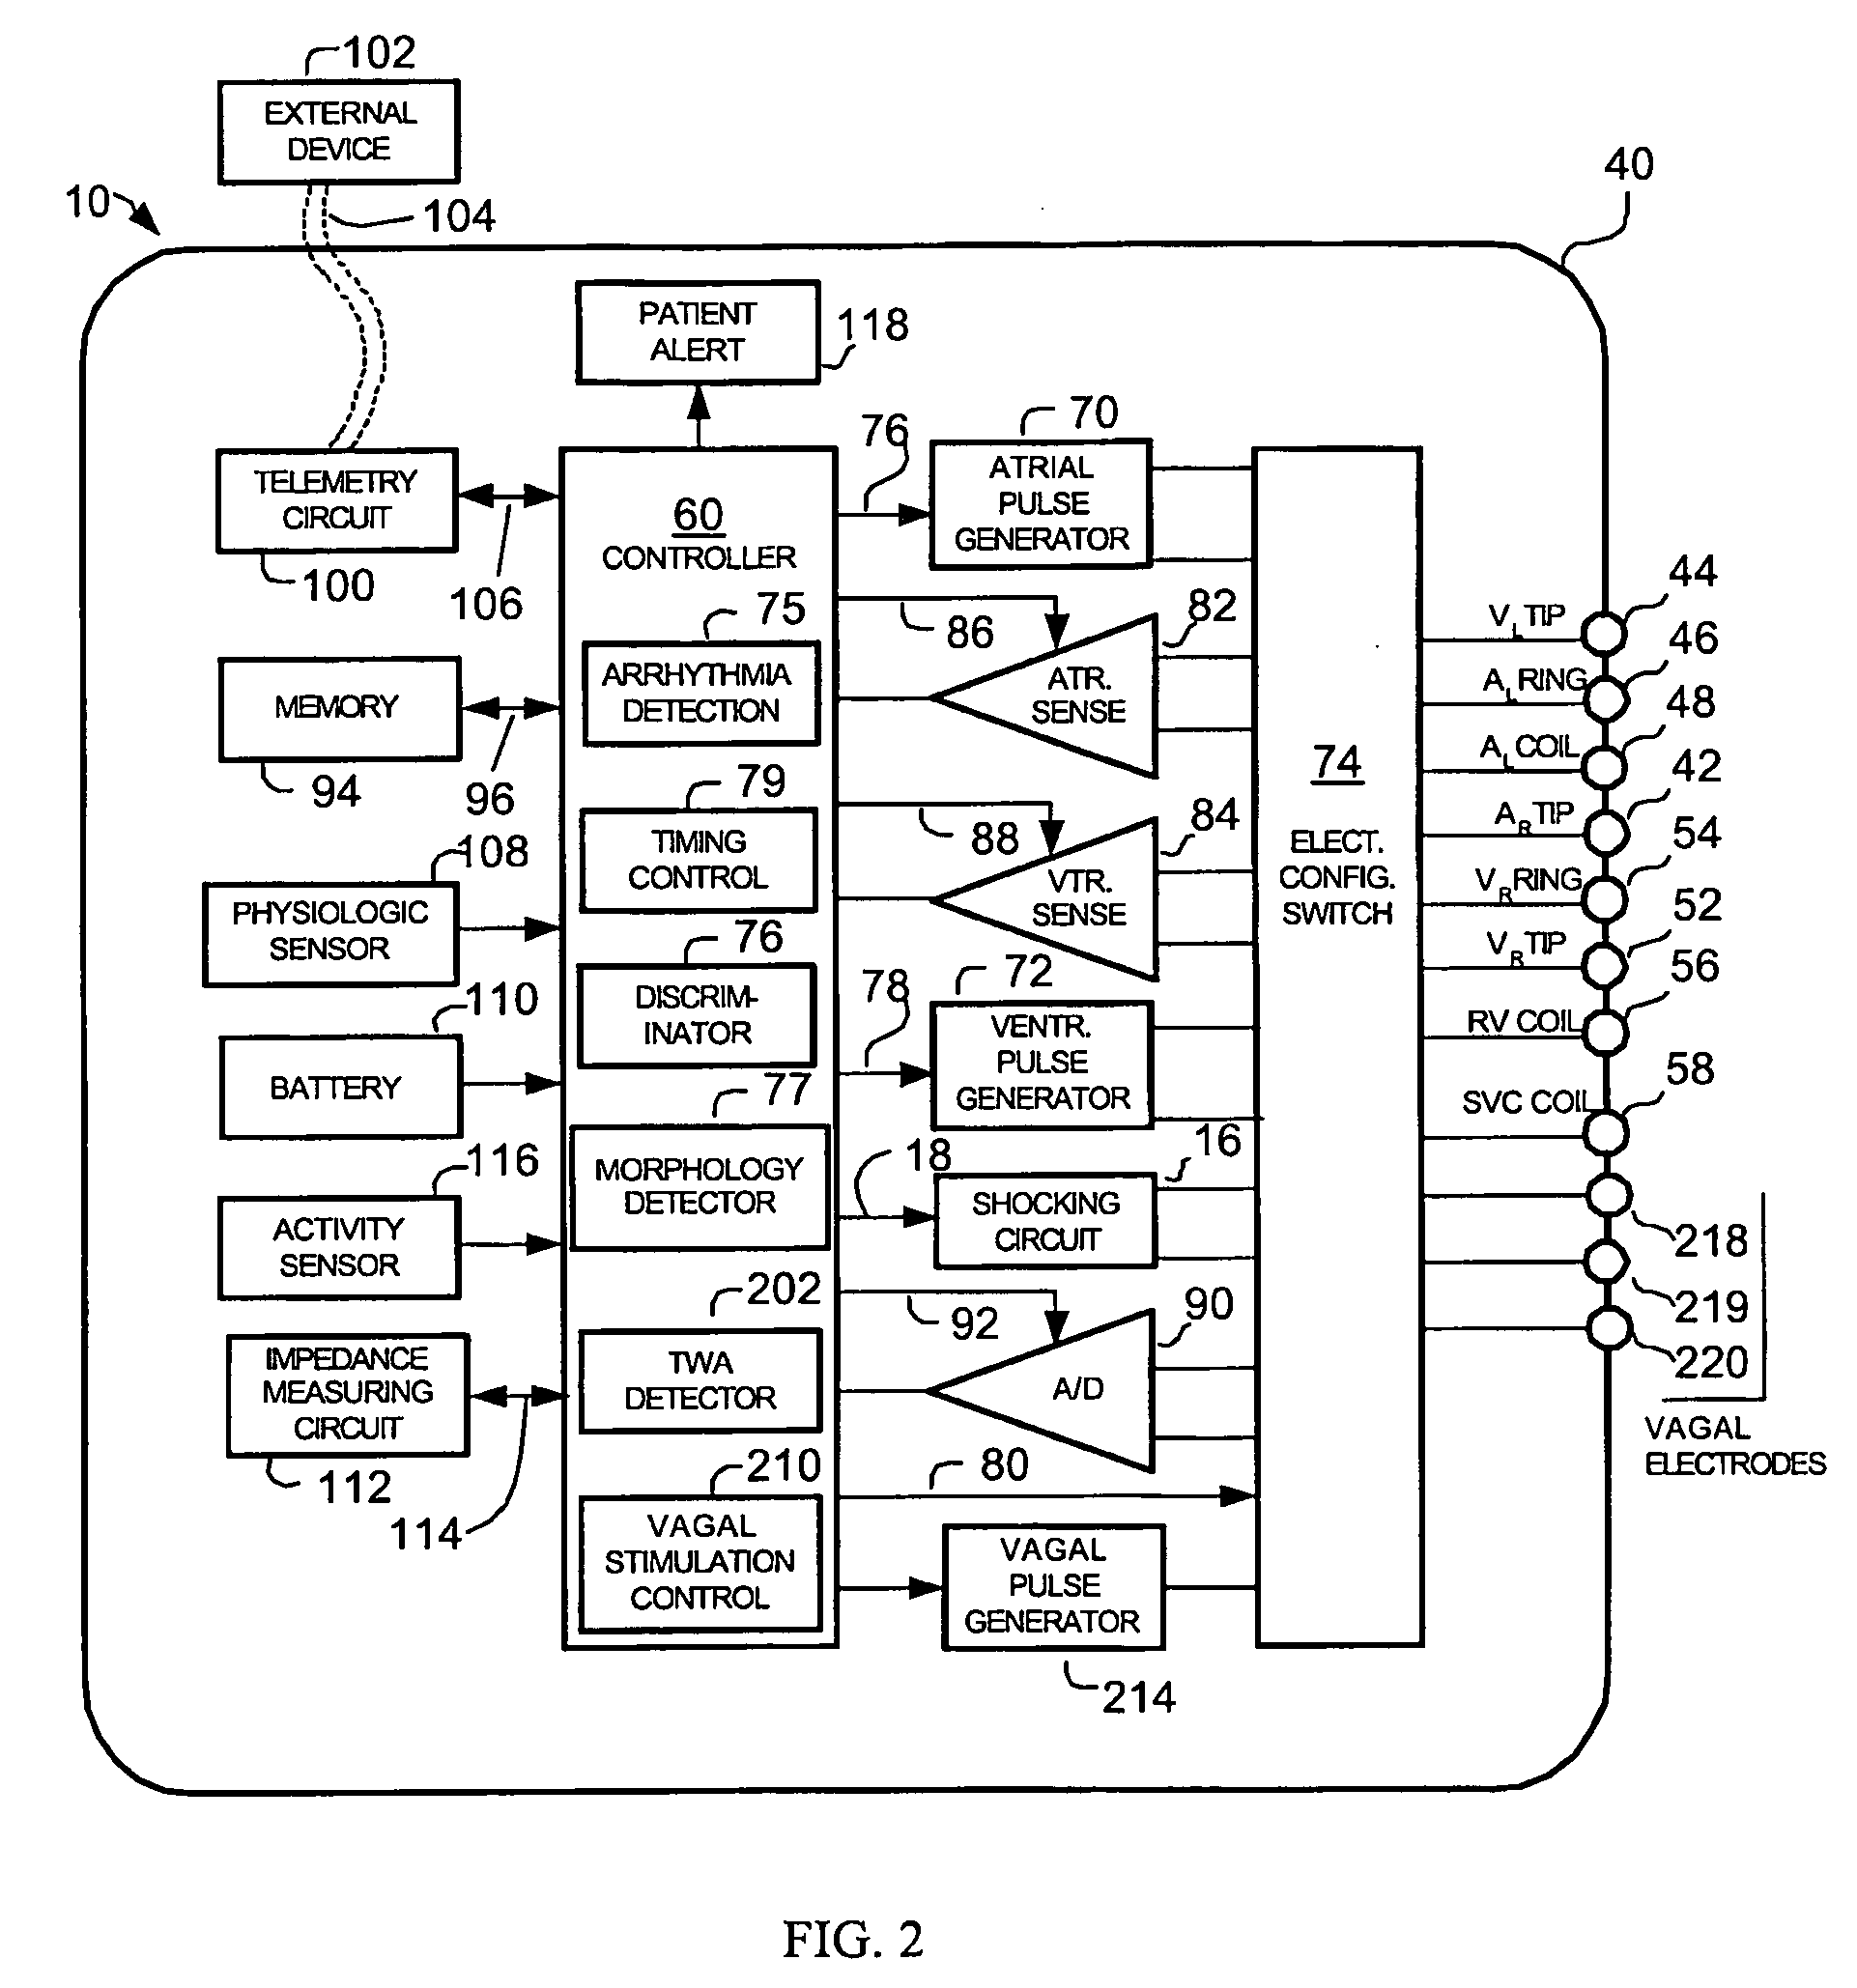 Methods and systems for analyzing t-wave alternants